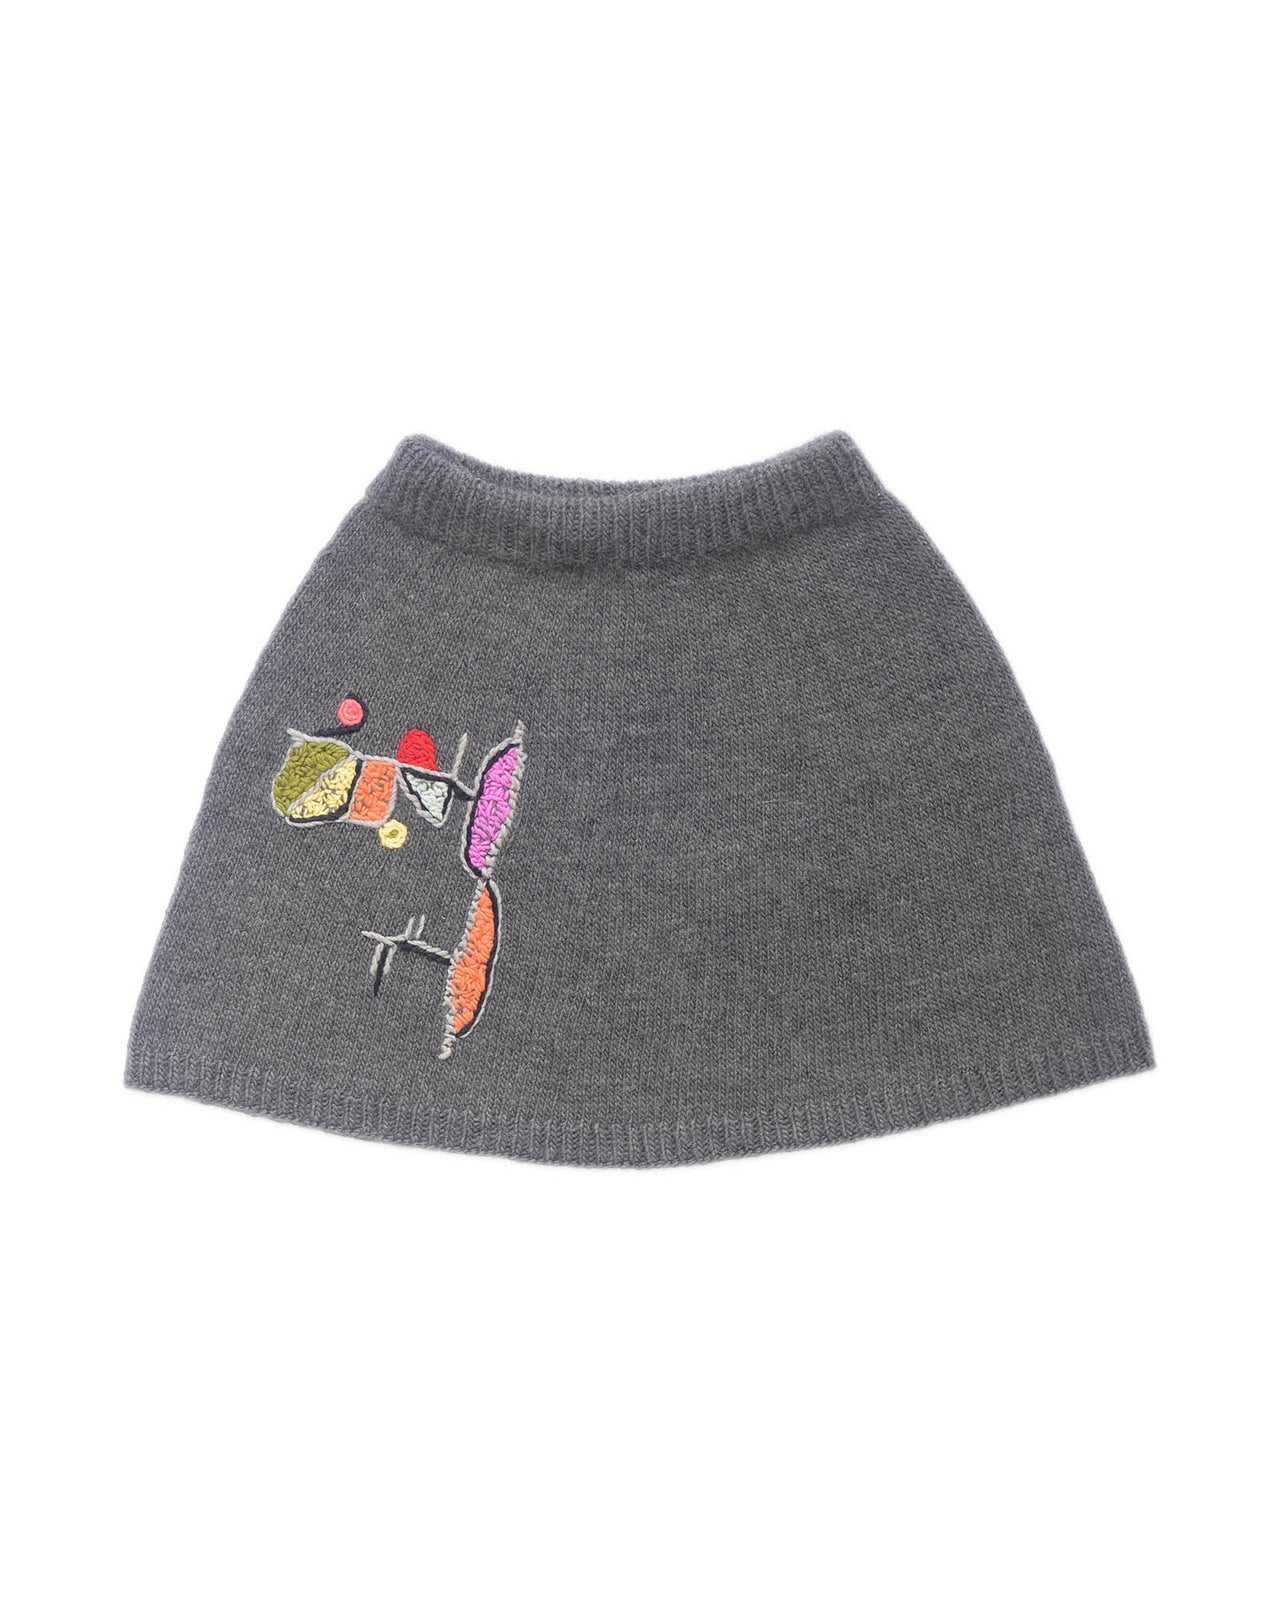 Grey wool skirt laid flat on white background. The skirt has a colourful embroidery on the right leg. 